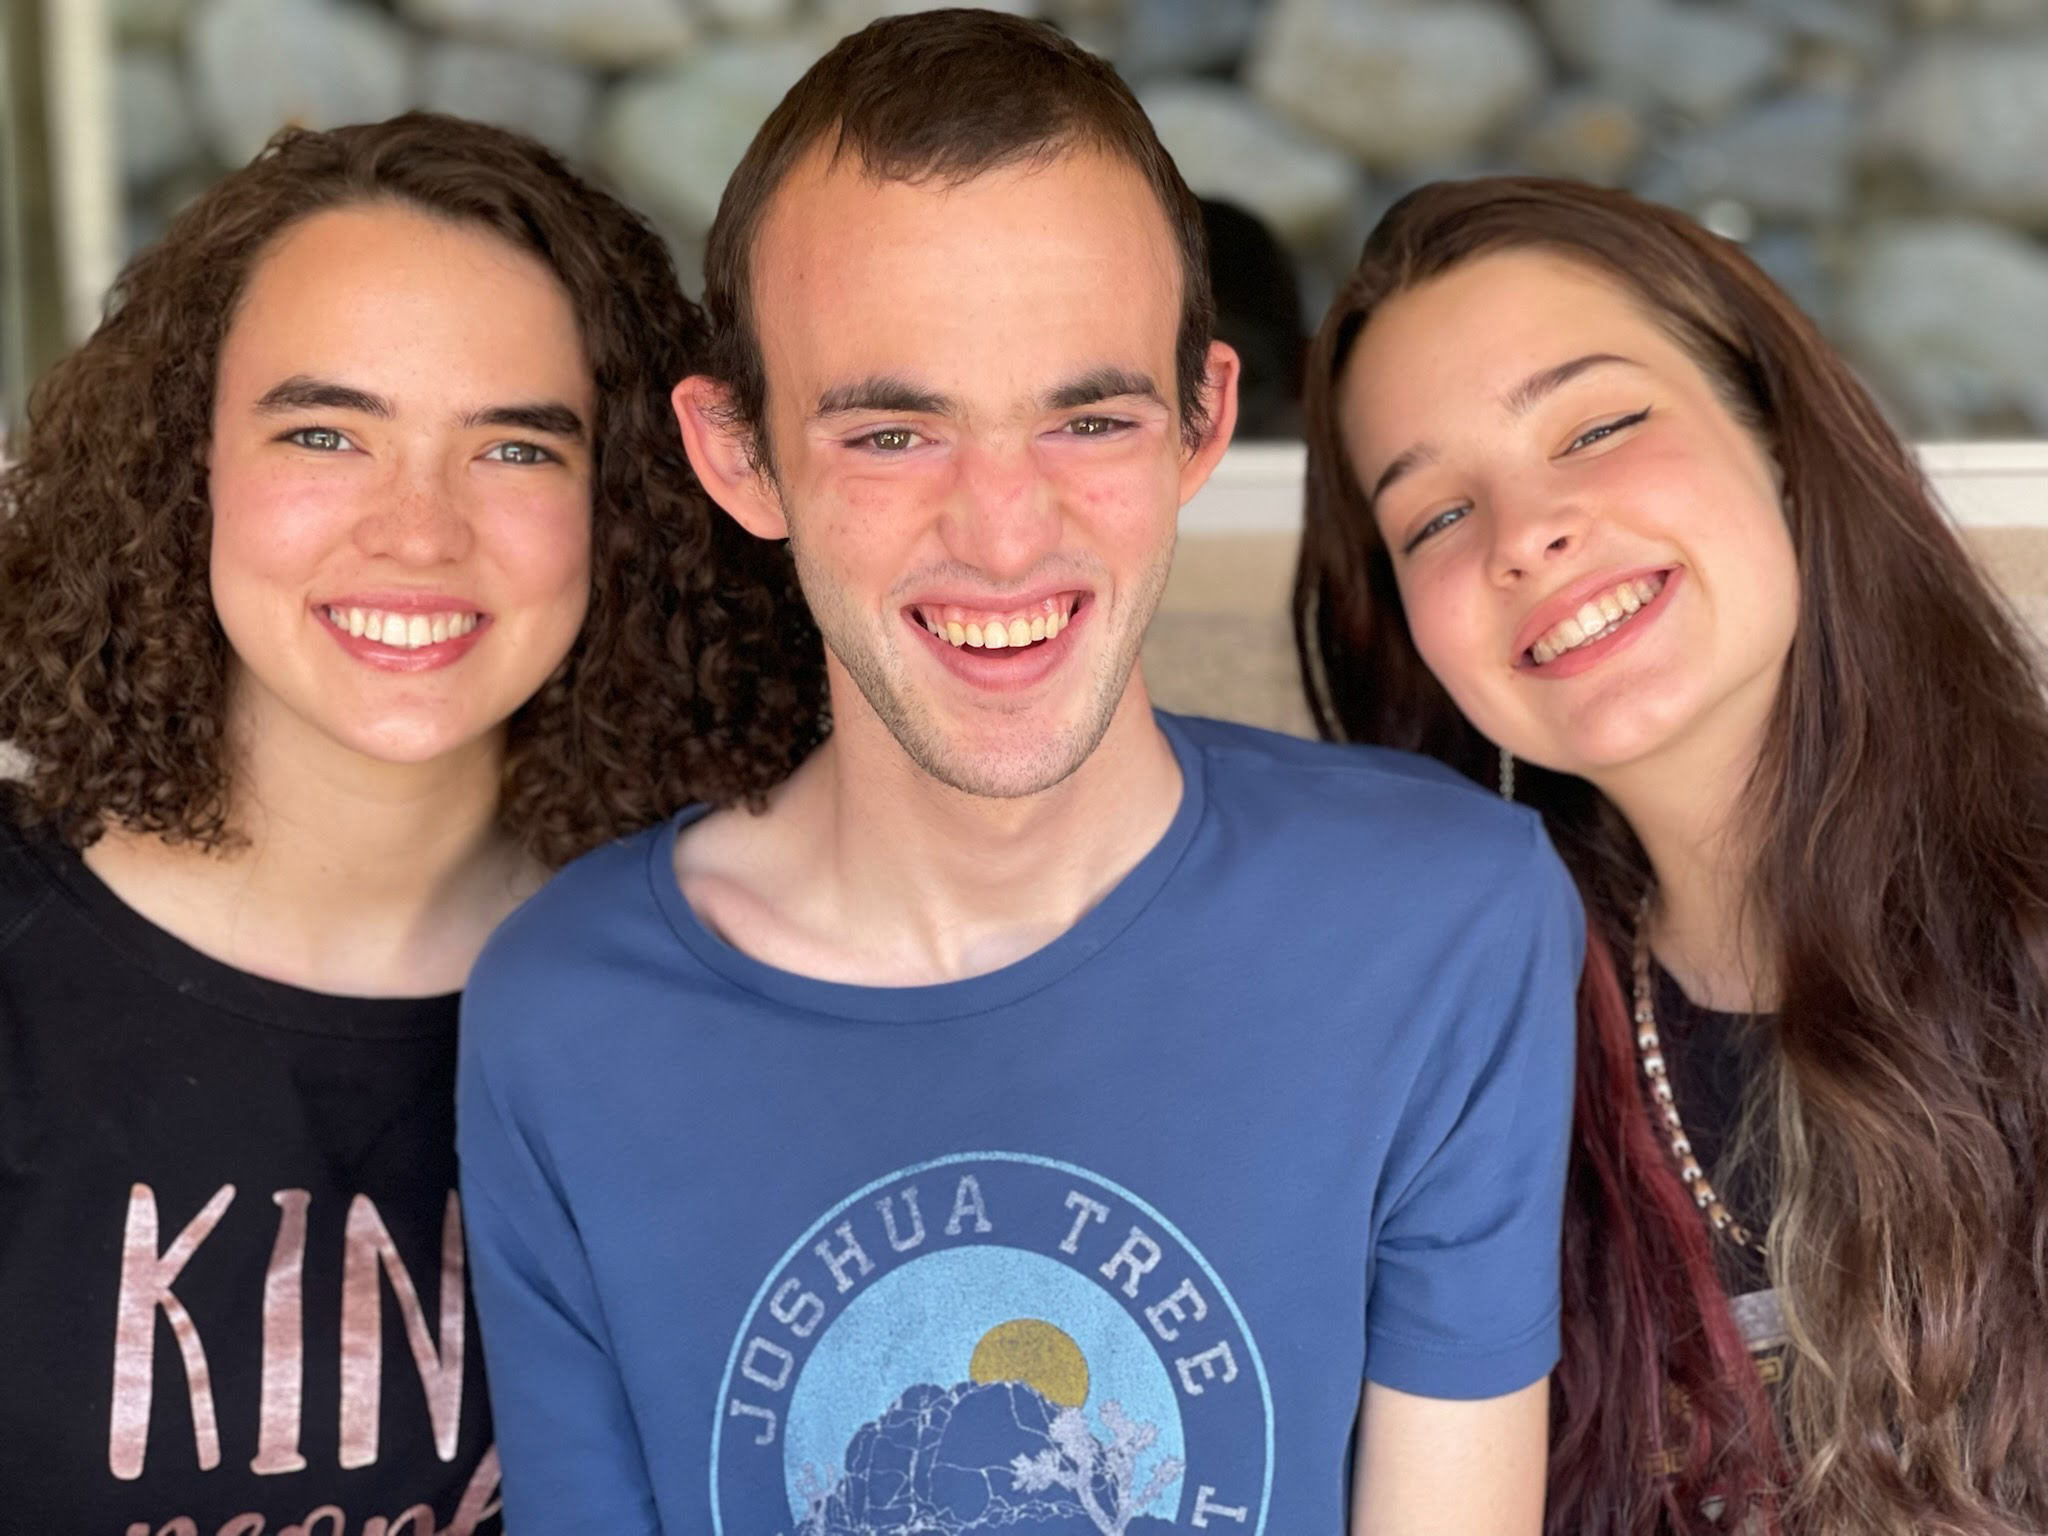 Young man smiles with his two sisters at his side